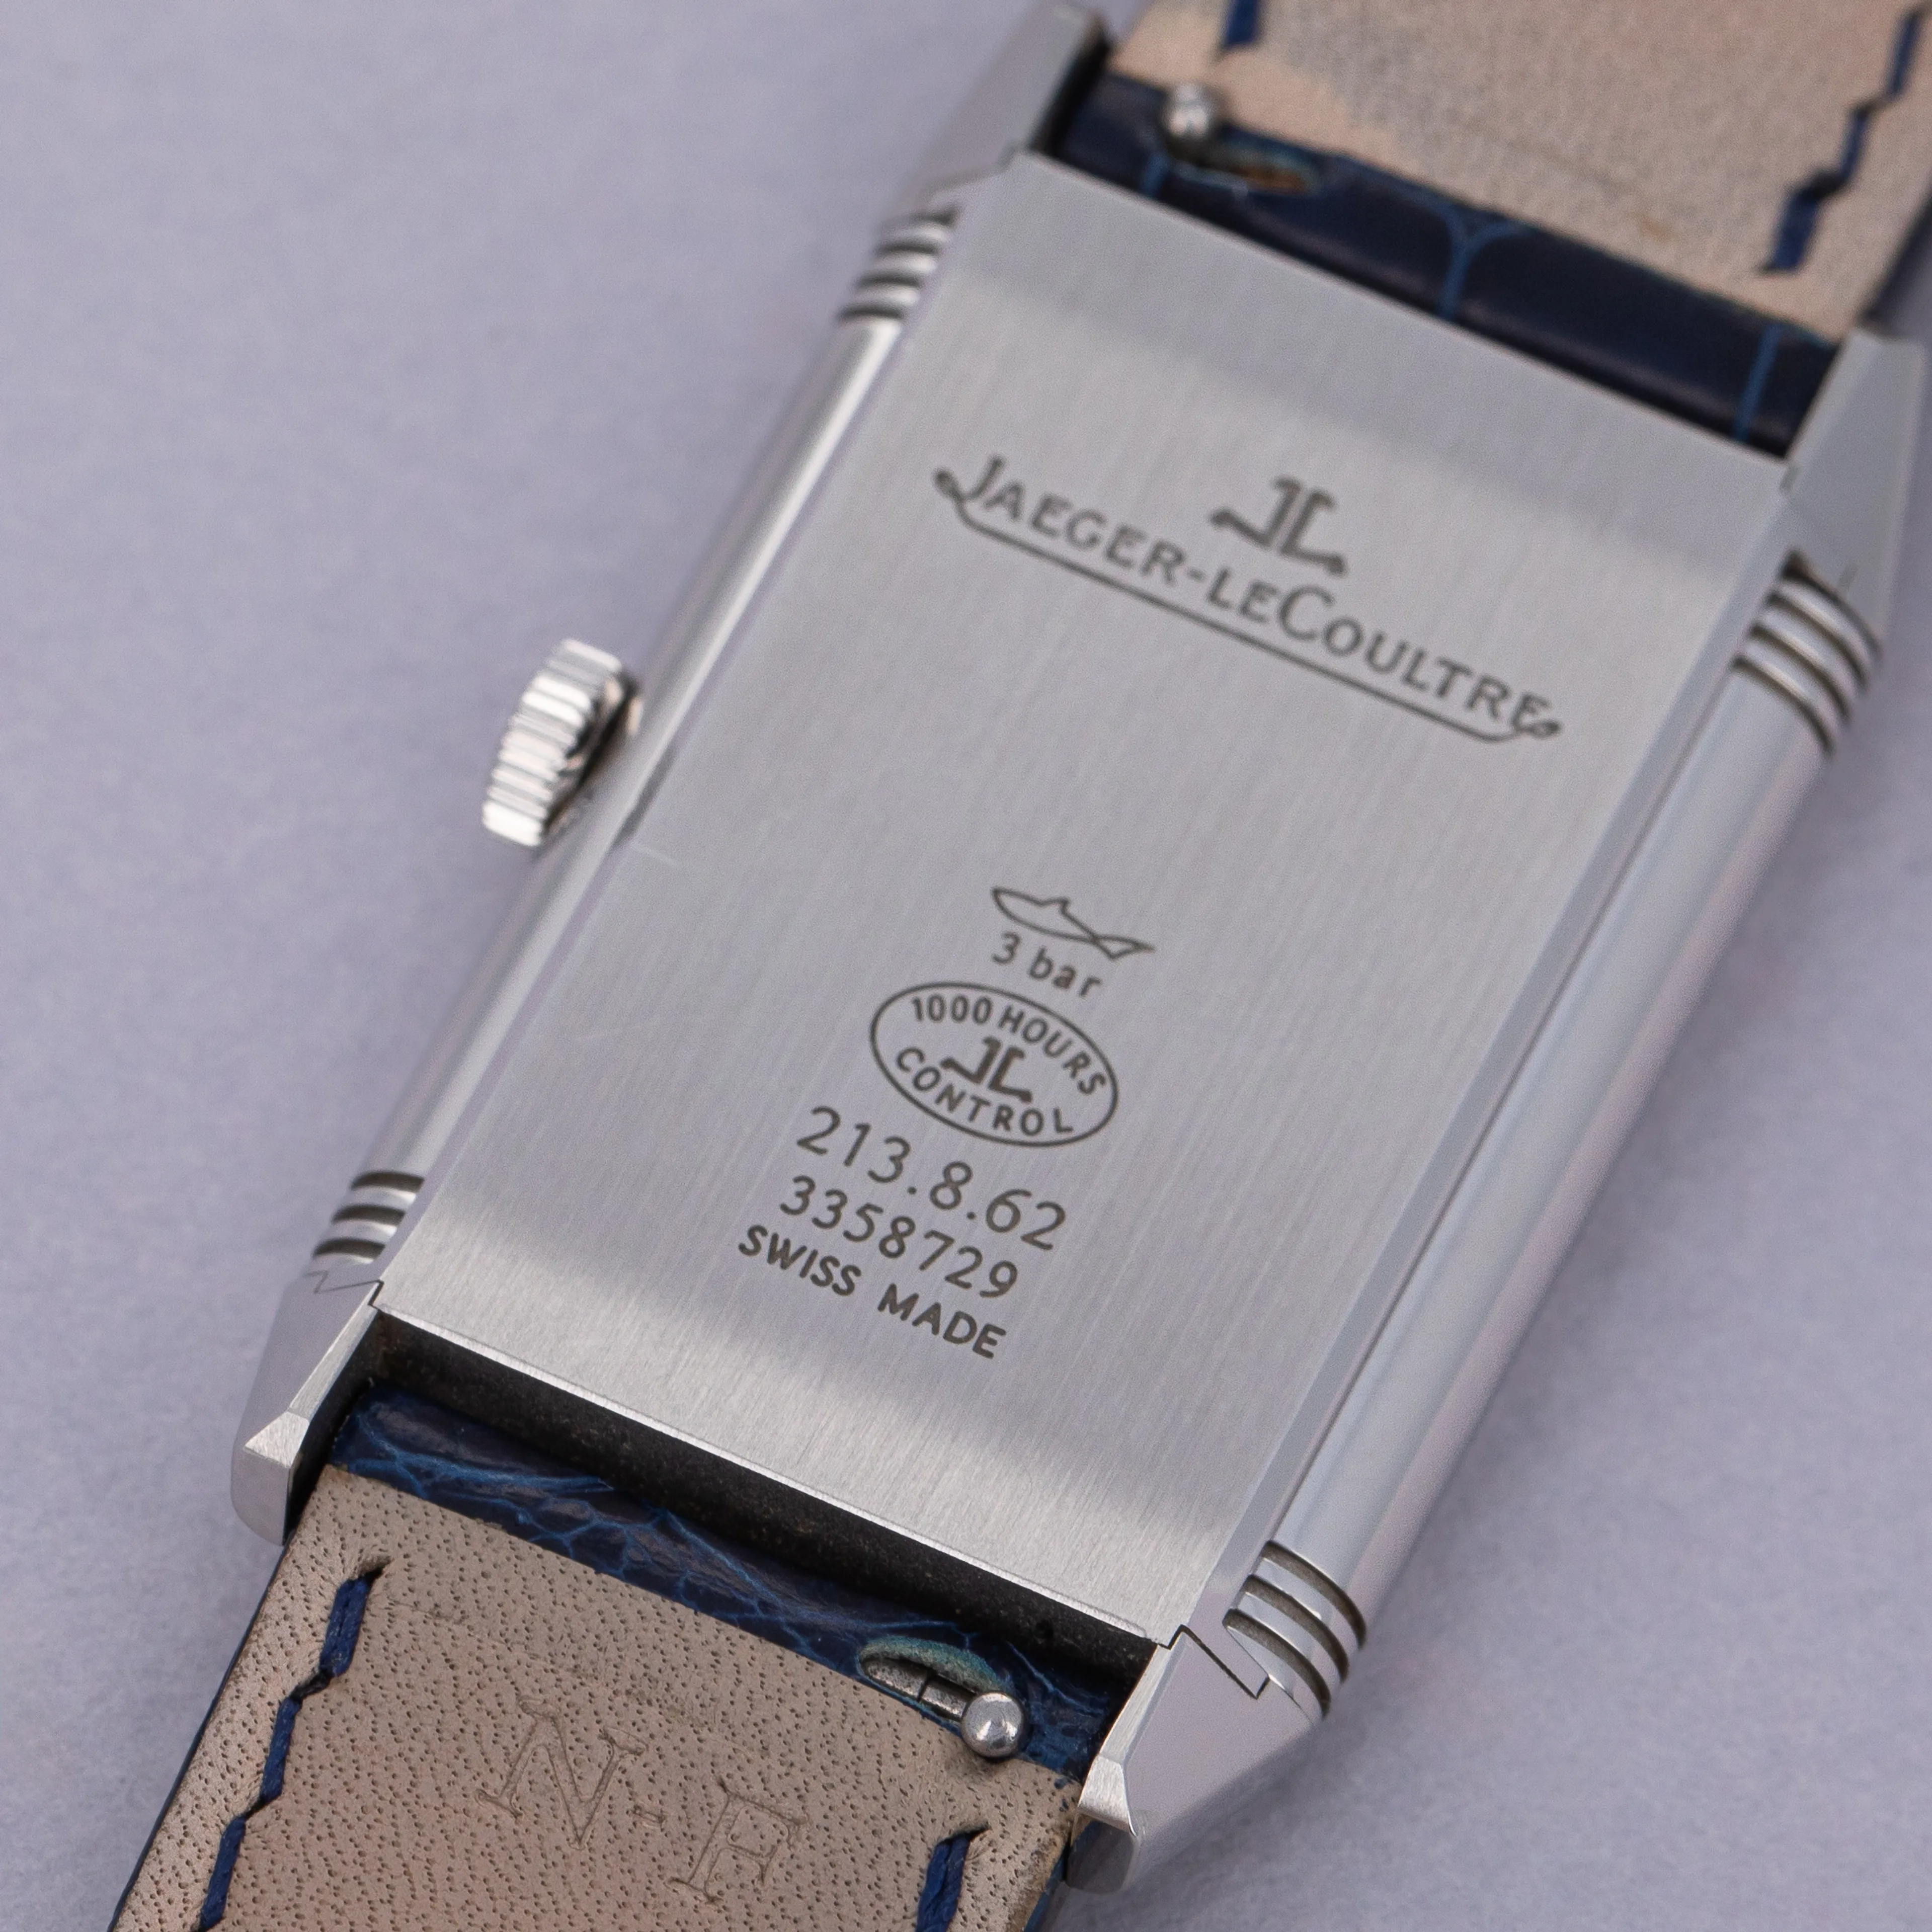 Jaeger-LeCoultre Reverso 213.8.62 25.5mm Stainless steel Silver 3